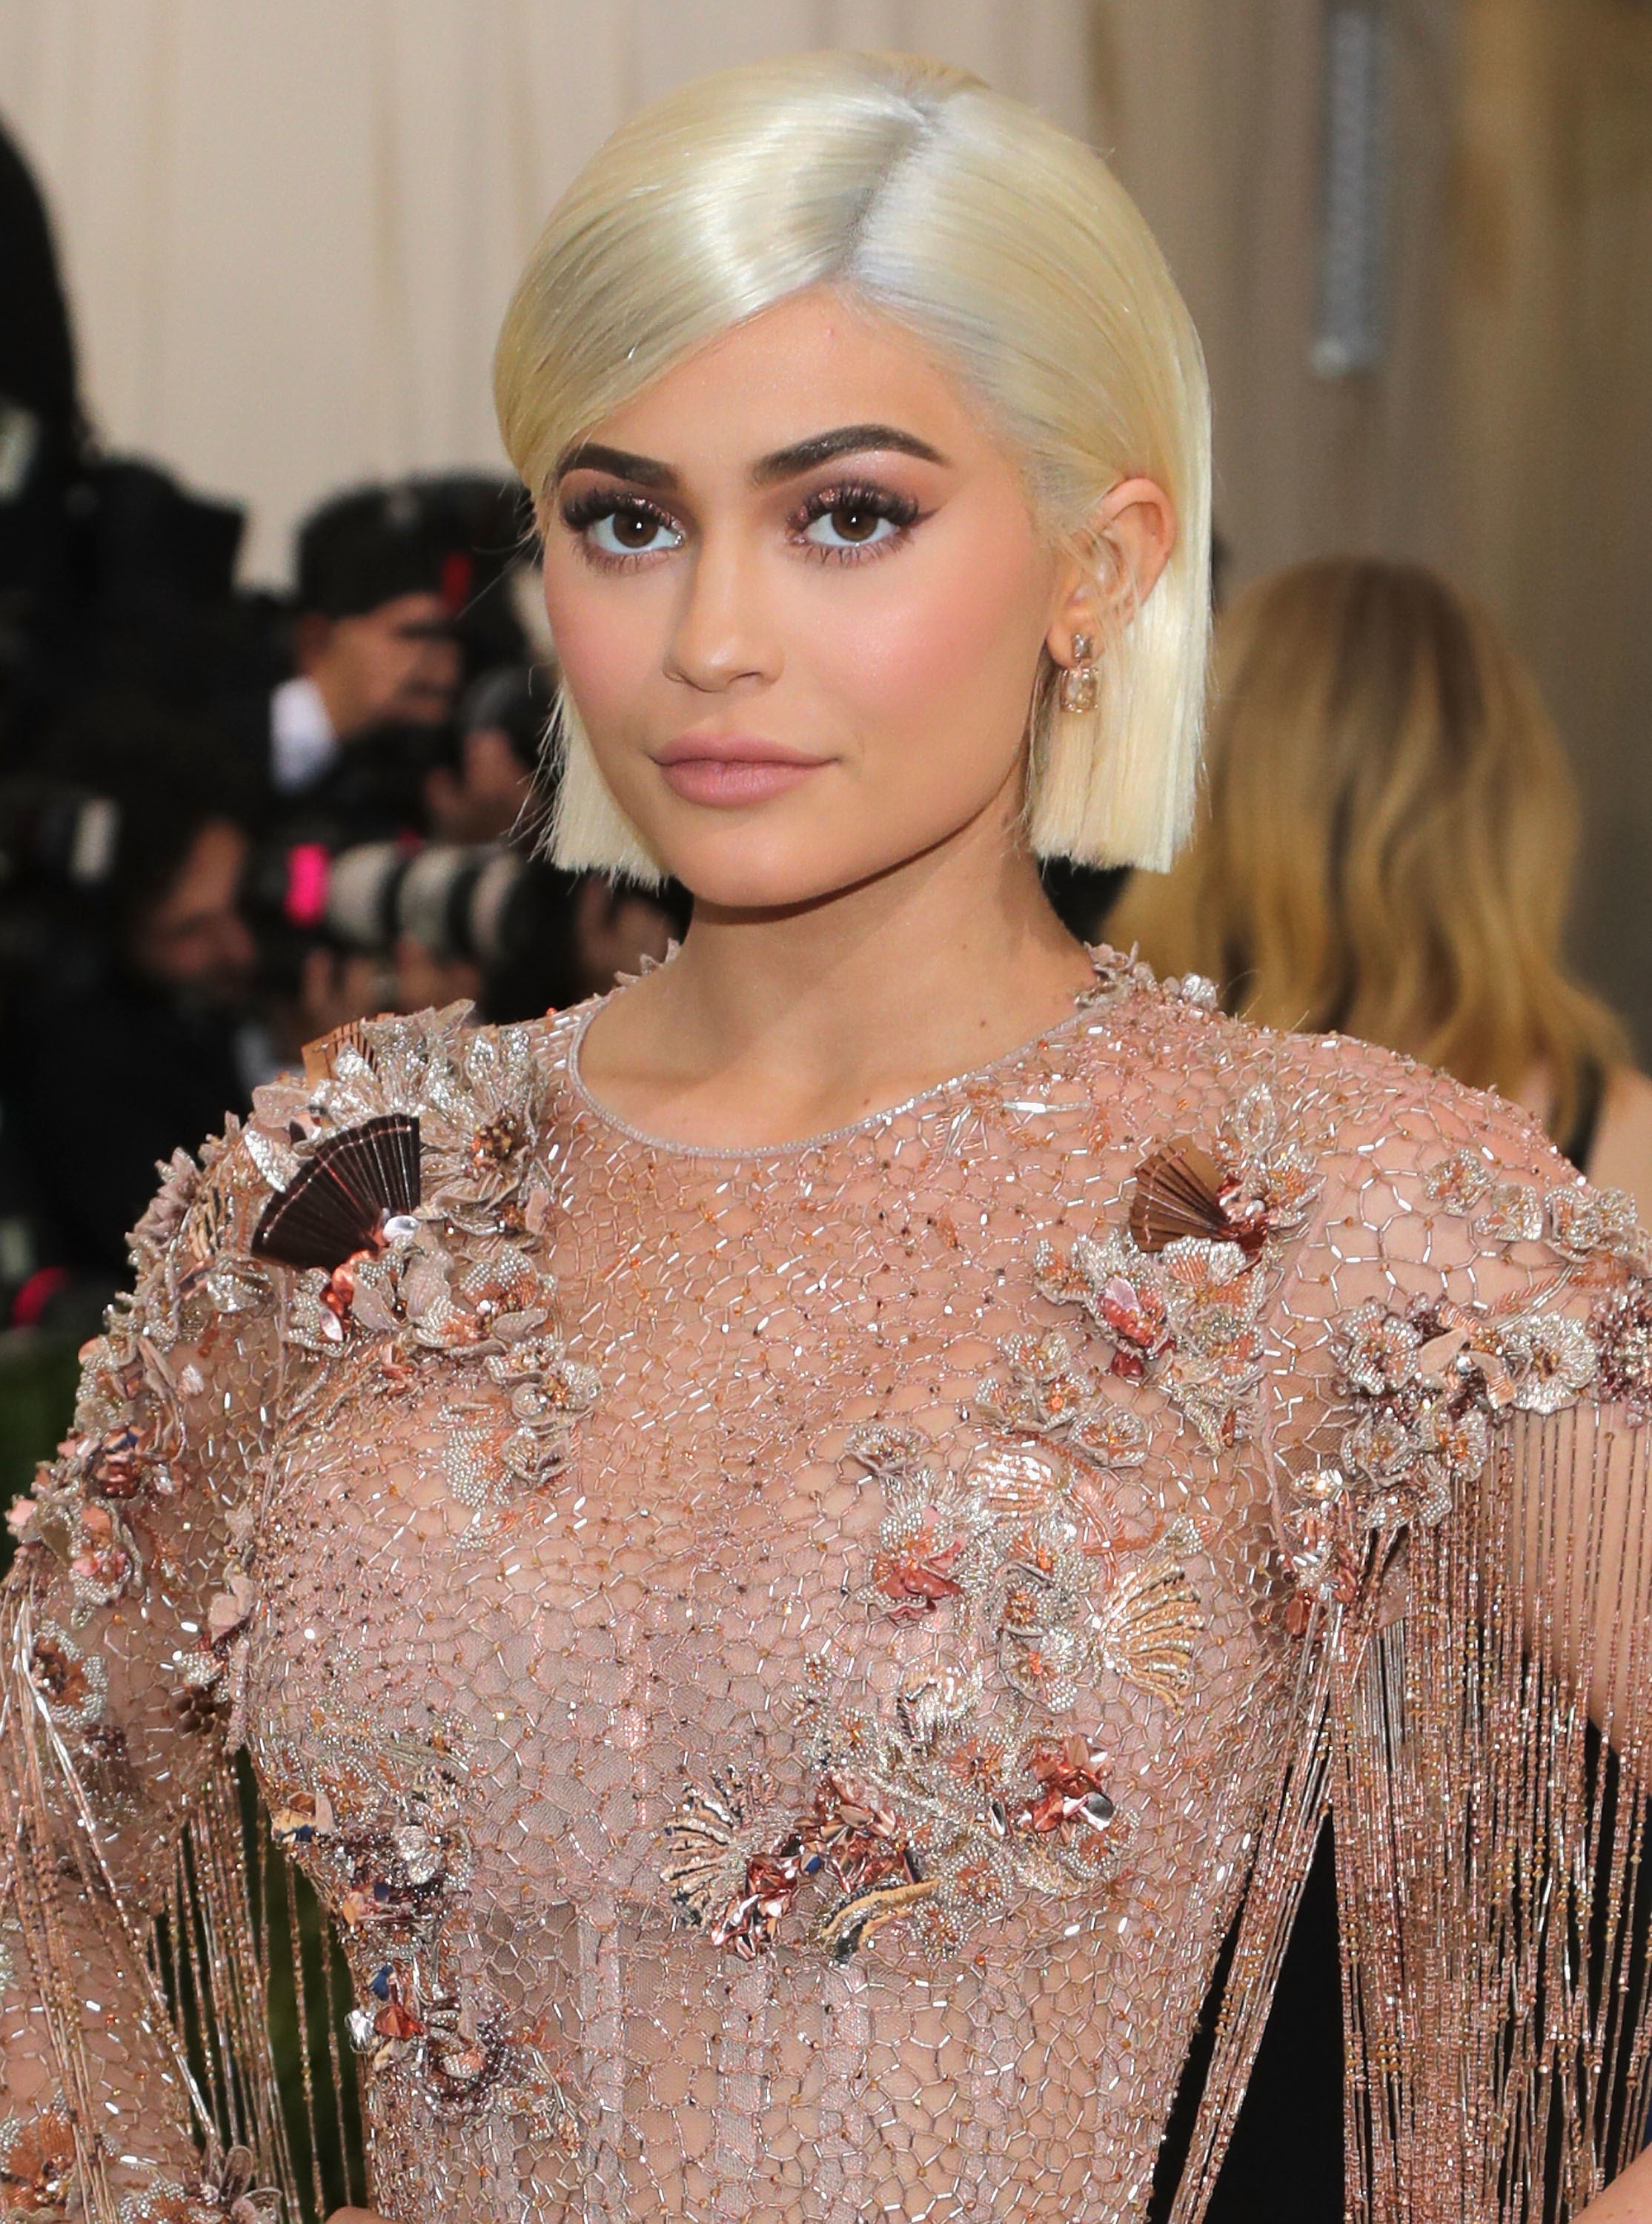 Unsurprised fans react to Kylie Jenner's boob job admission